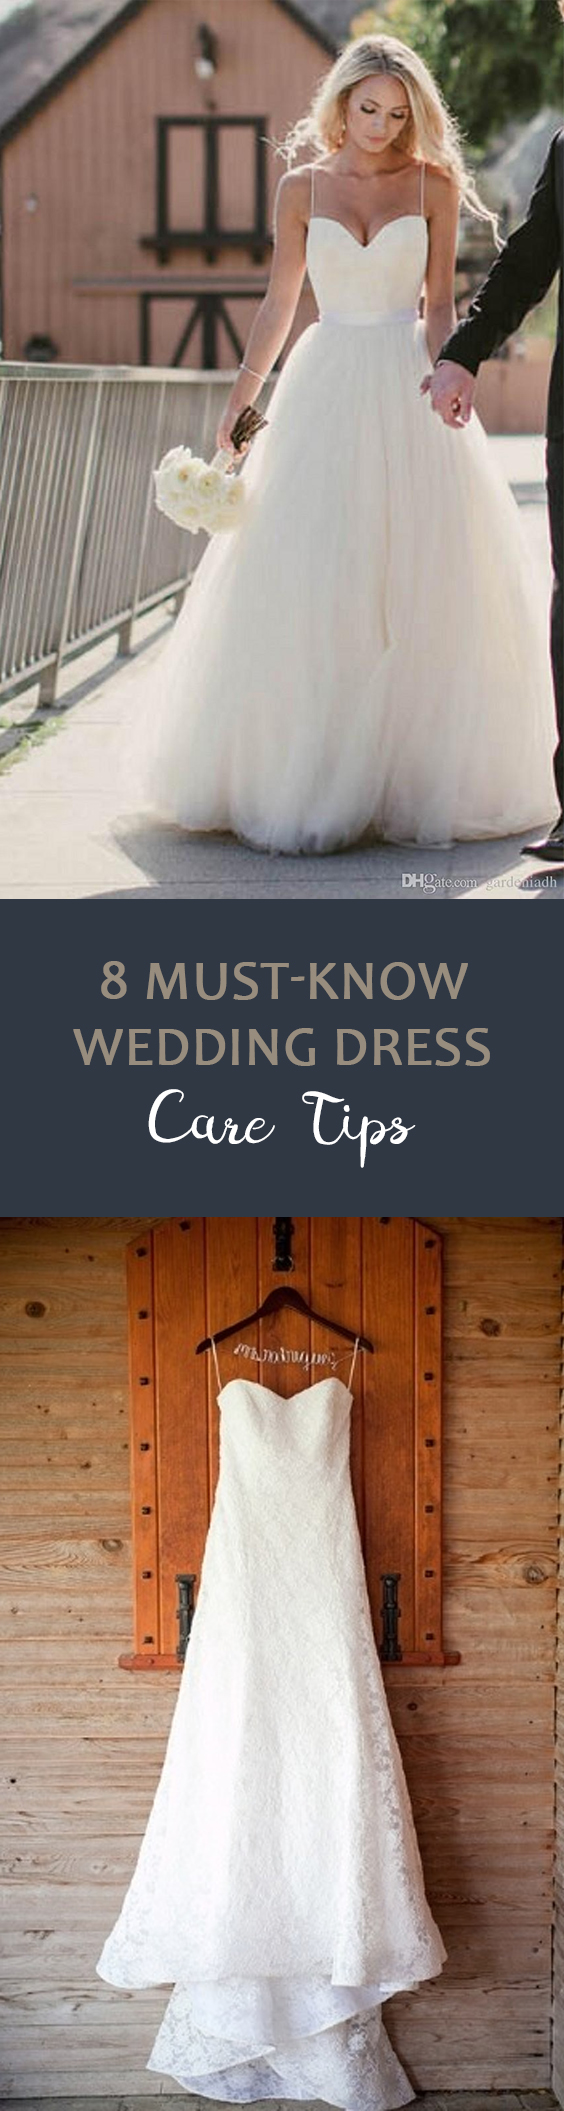 How to Care For Your Wedding Dress, Wedding Dress TIps, Wedding Dress Care Tips, How to Care for Your Wedding Dress, Wedding Dress Care, Wedding Dress Storage TIps, How to Store Your Wedding Dress, Popular Pin